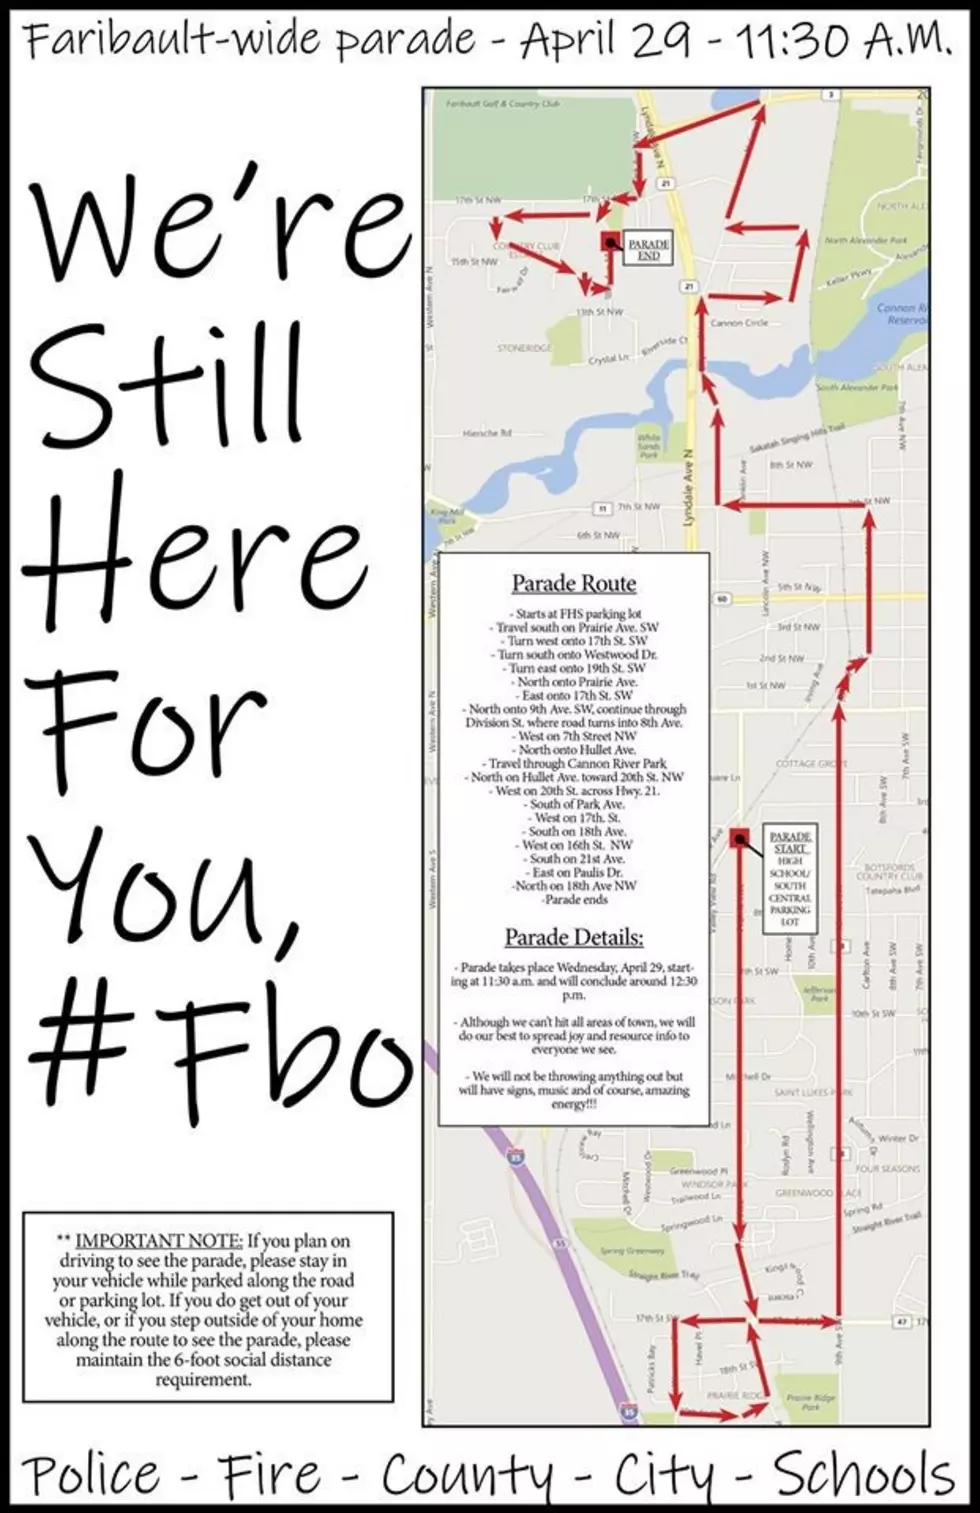 Faribault and Lonsdale to Have Morale Boosting Parades